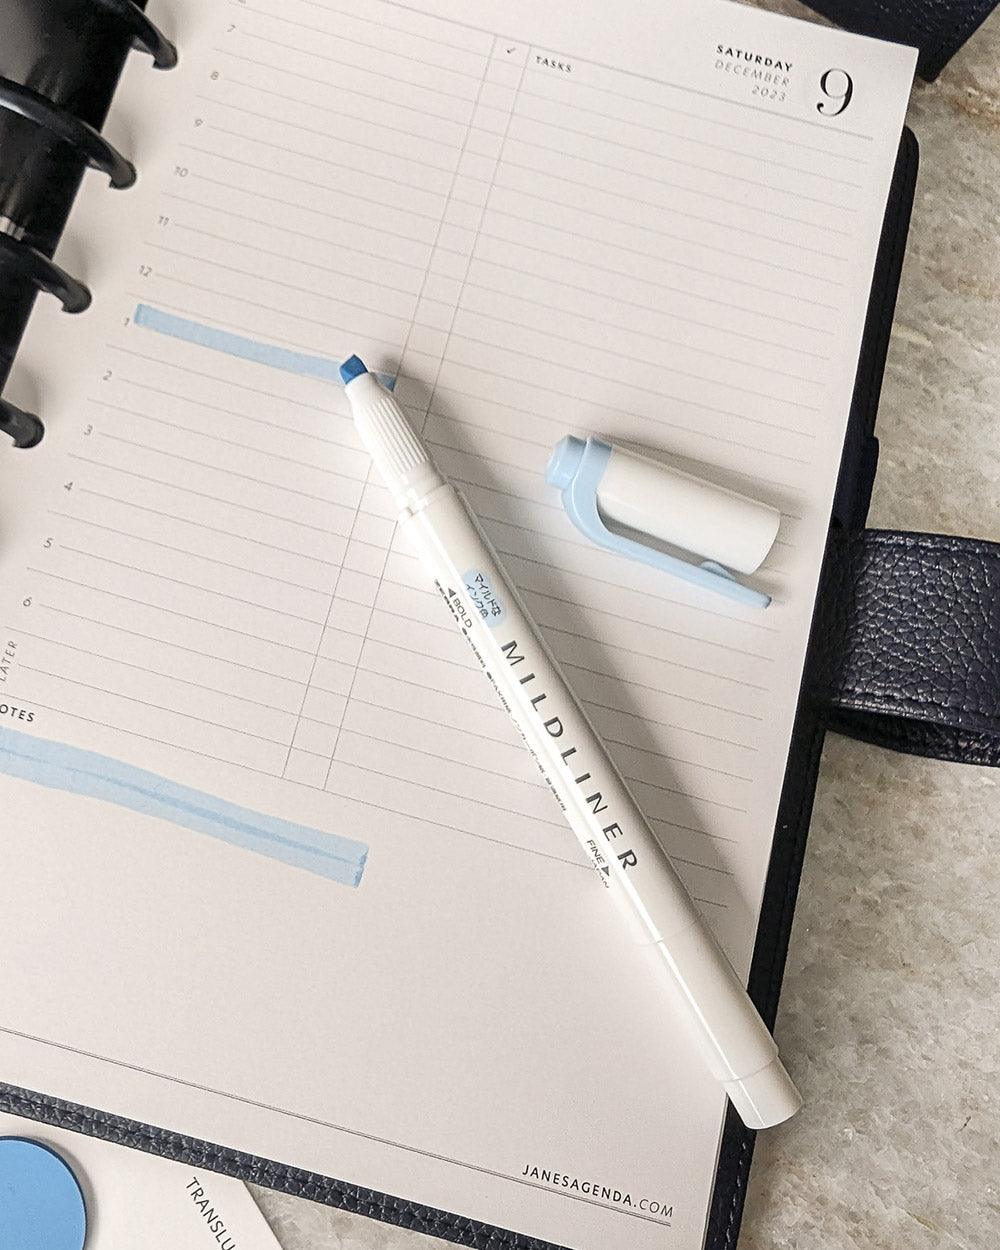 Soda Blue mildliner highlighting marker for planning in your discbound or six ring planner systems and disc notebooks by Jane's Agenda.